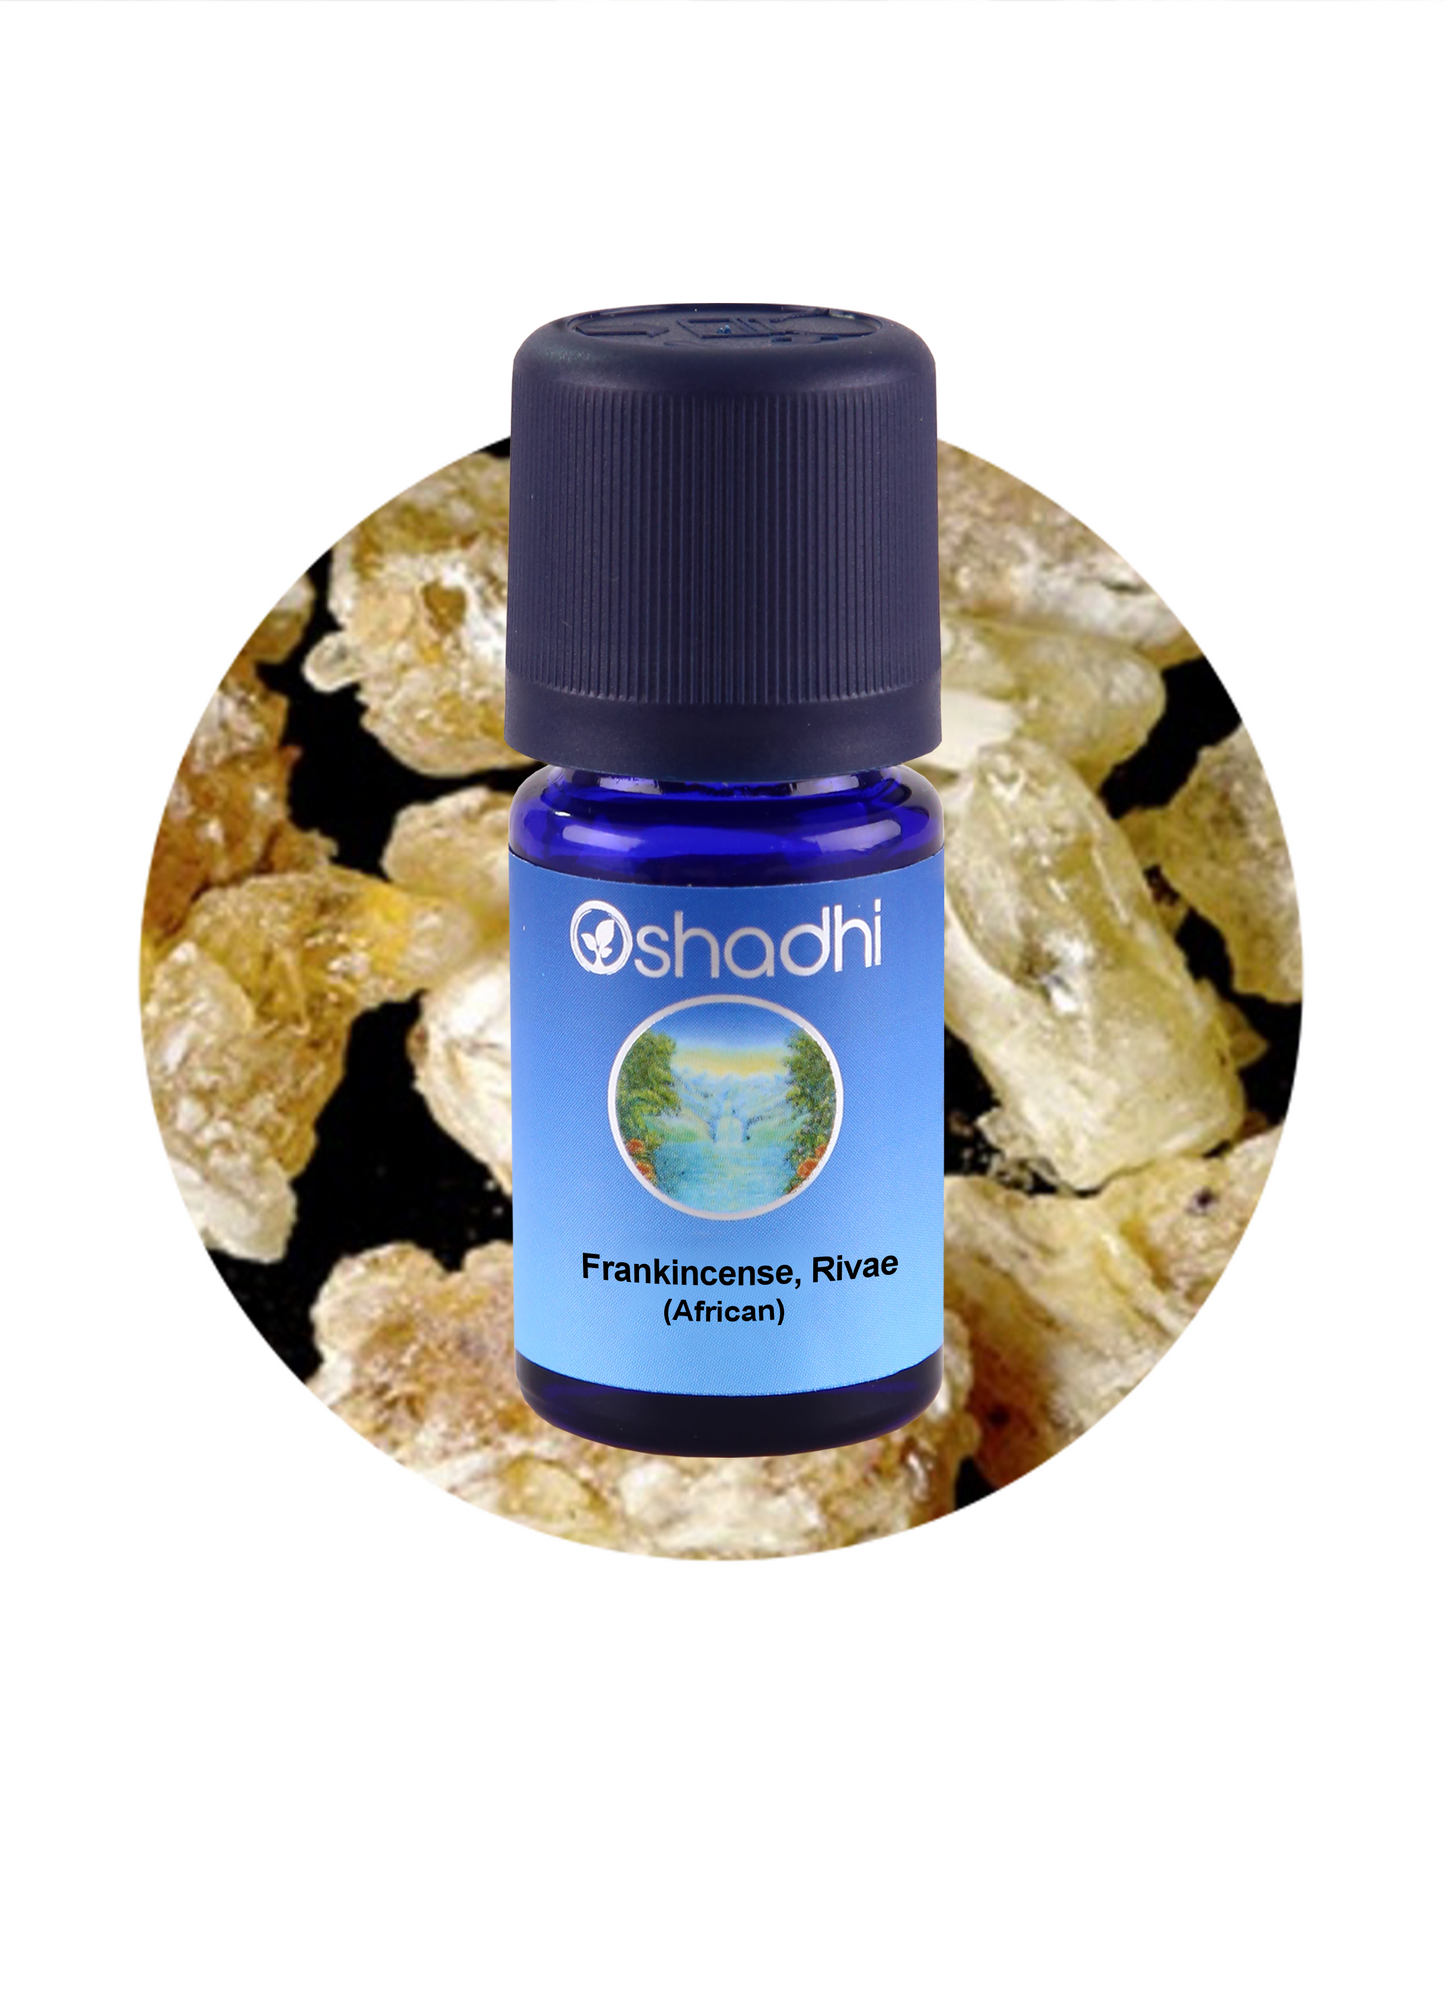 Frankincense, Rivae (African)